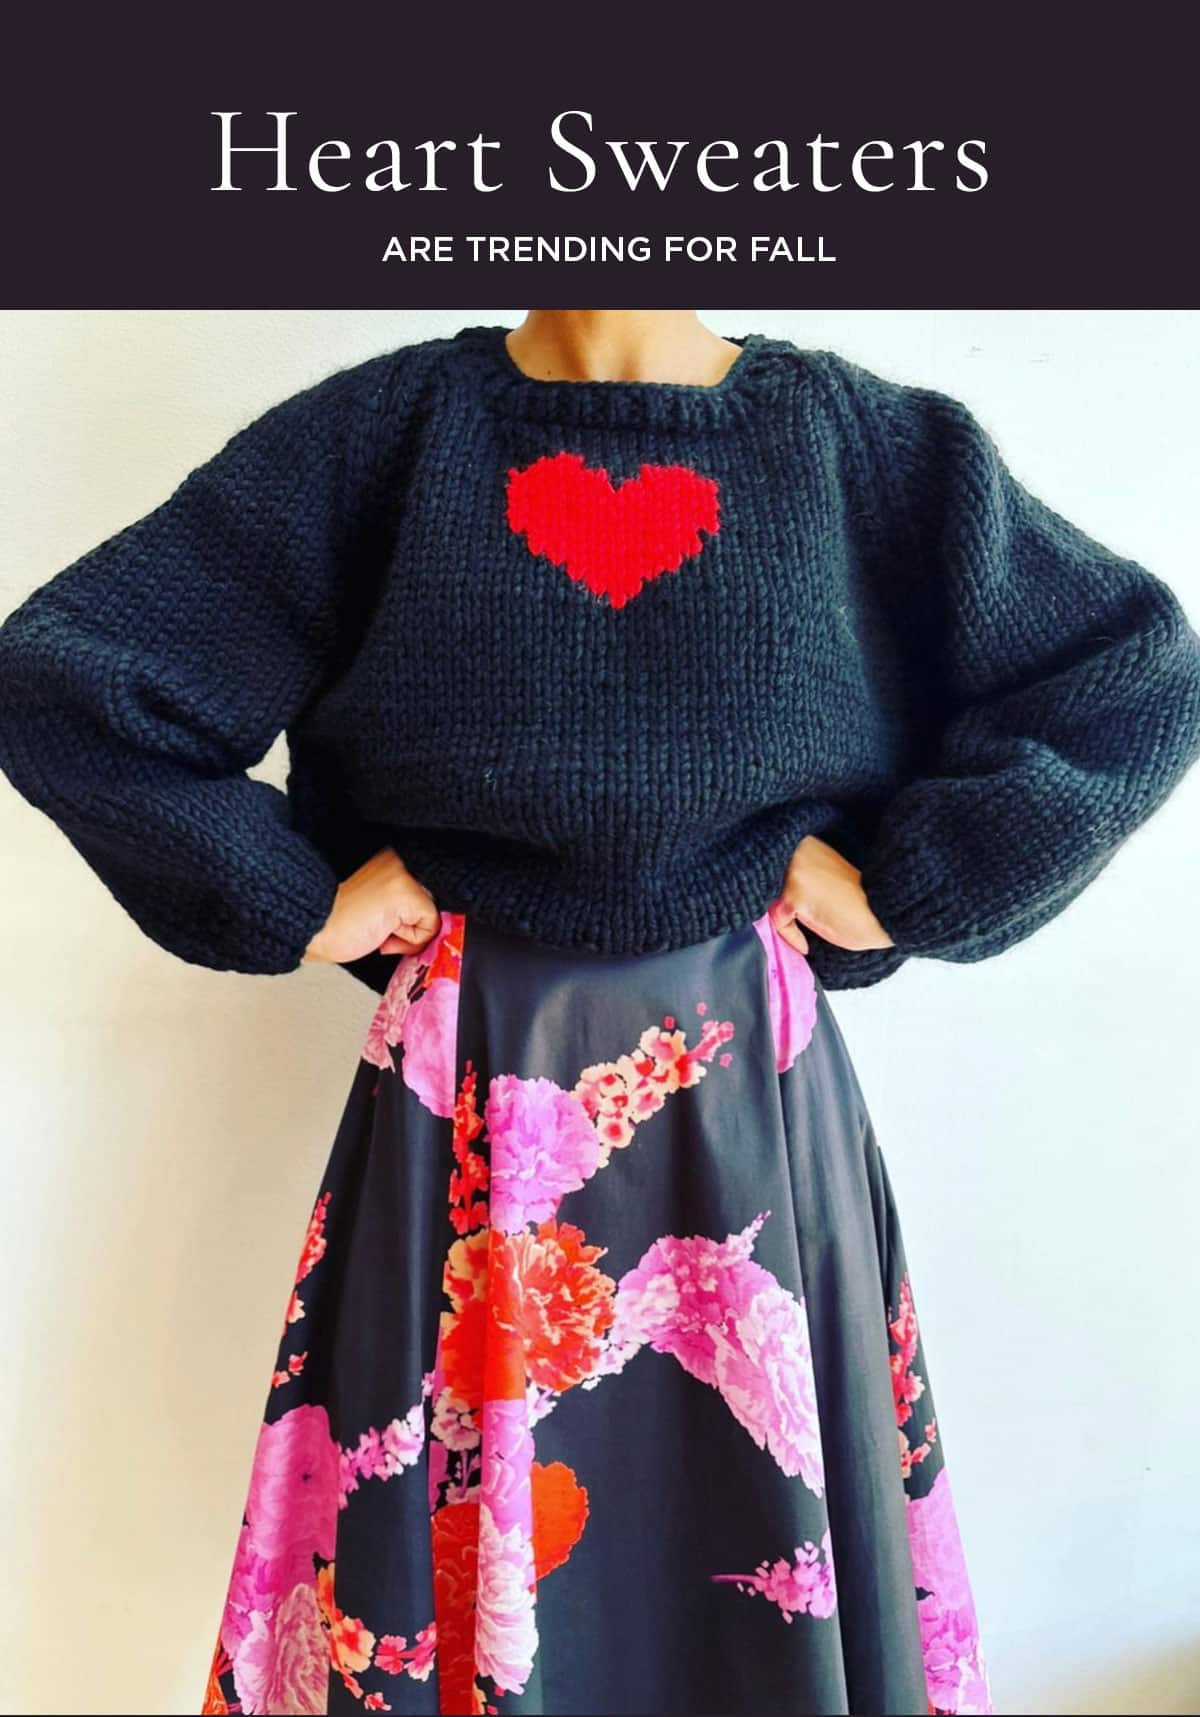 Best Heart Sweaters Trending For Fall 2023 - Heart Sweater from Felt Chicago dressed up with a floral skirt